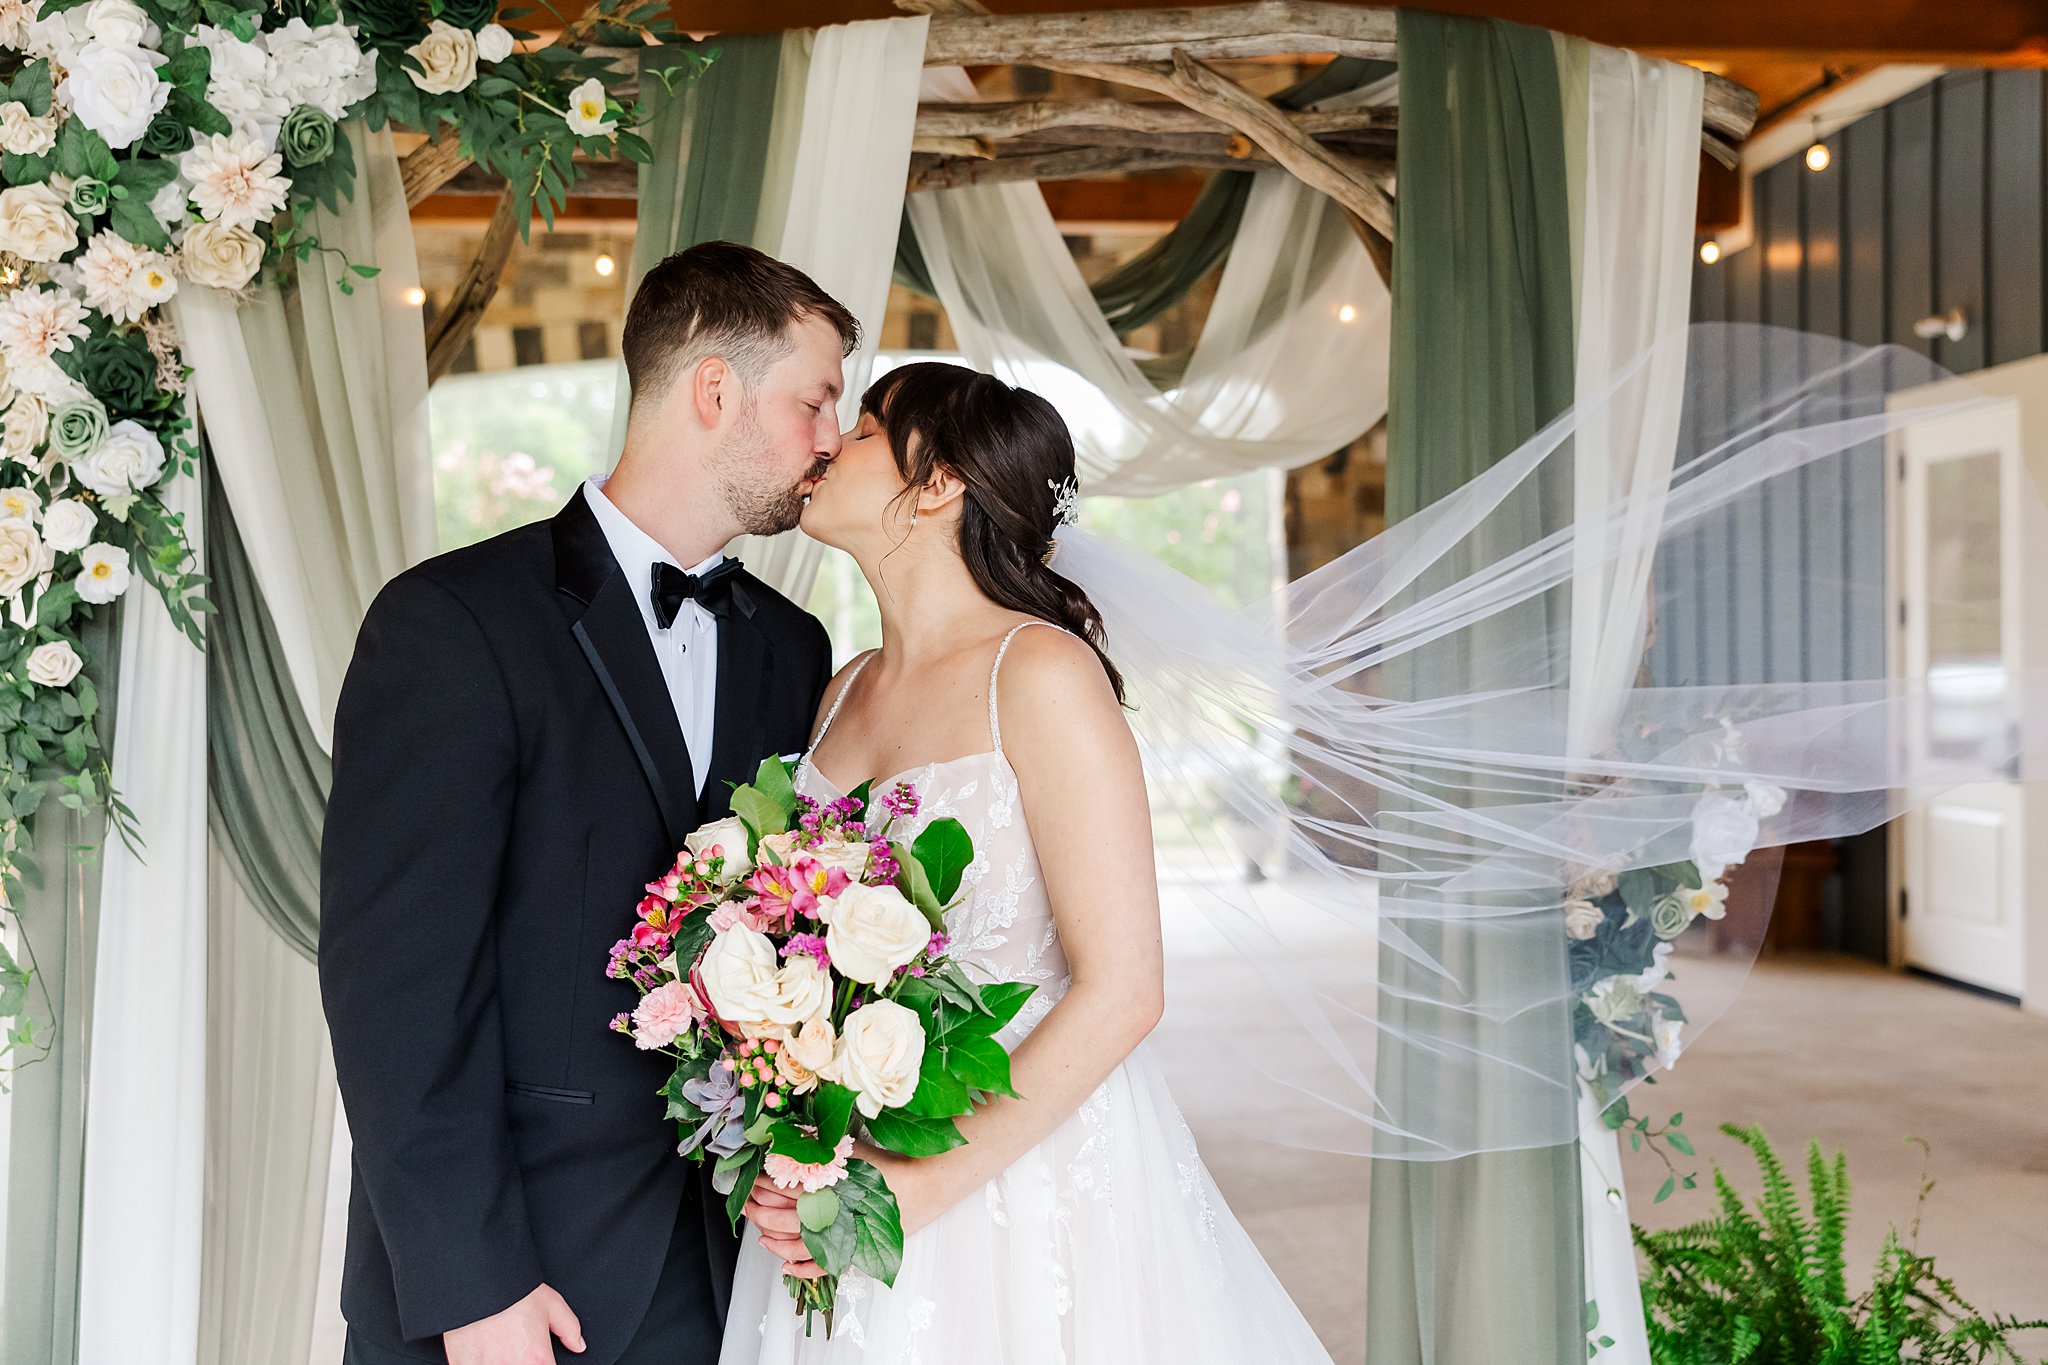 Veil swoops while bride and groom kiss after their wedding at the Maine of Williamsburg